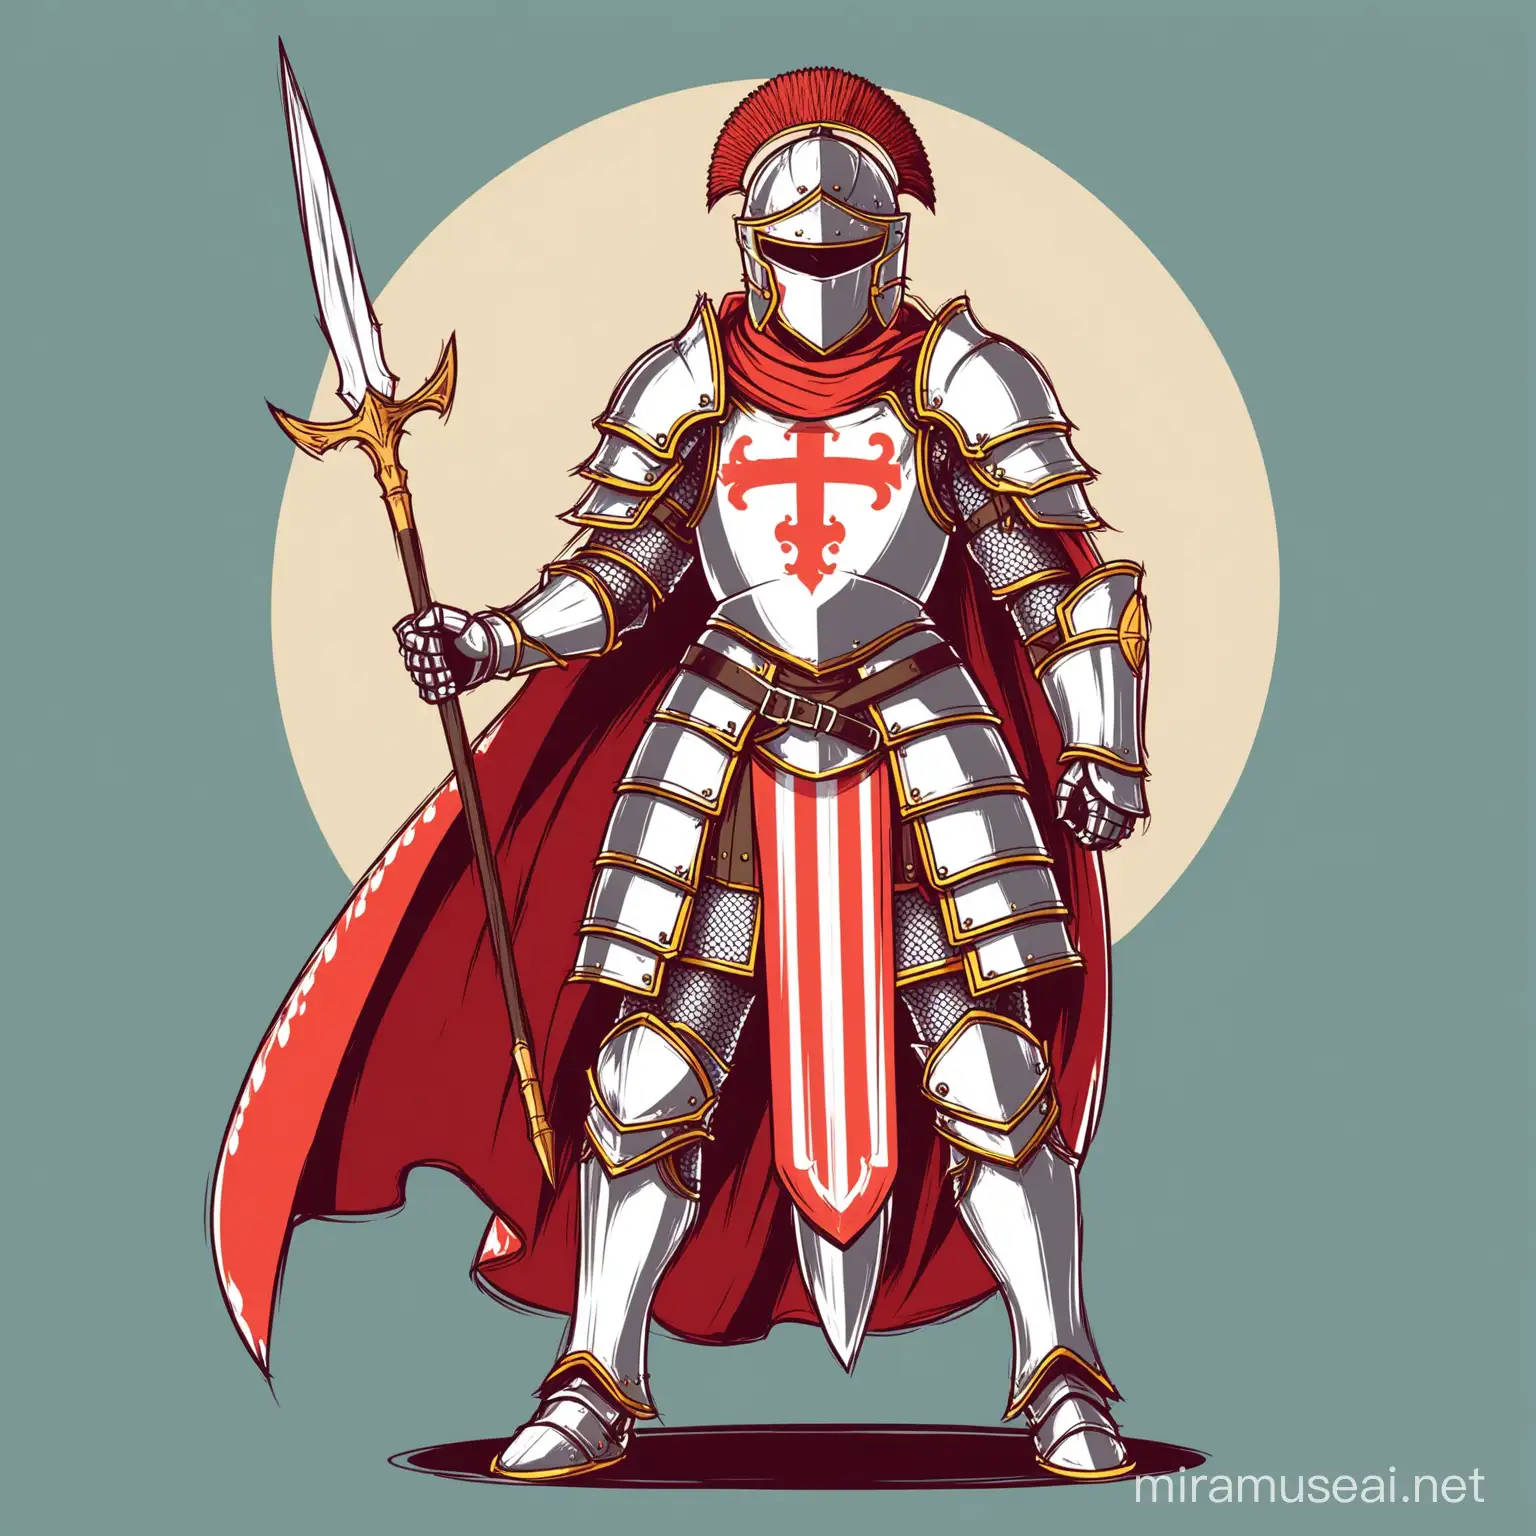 Male Warrior Character in Armor of Saint George Holding Spear and Helmet Vector Illustration